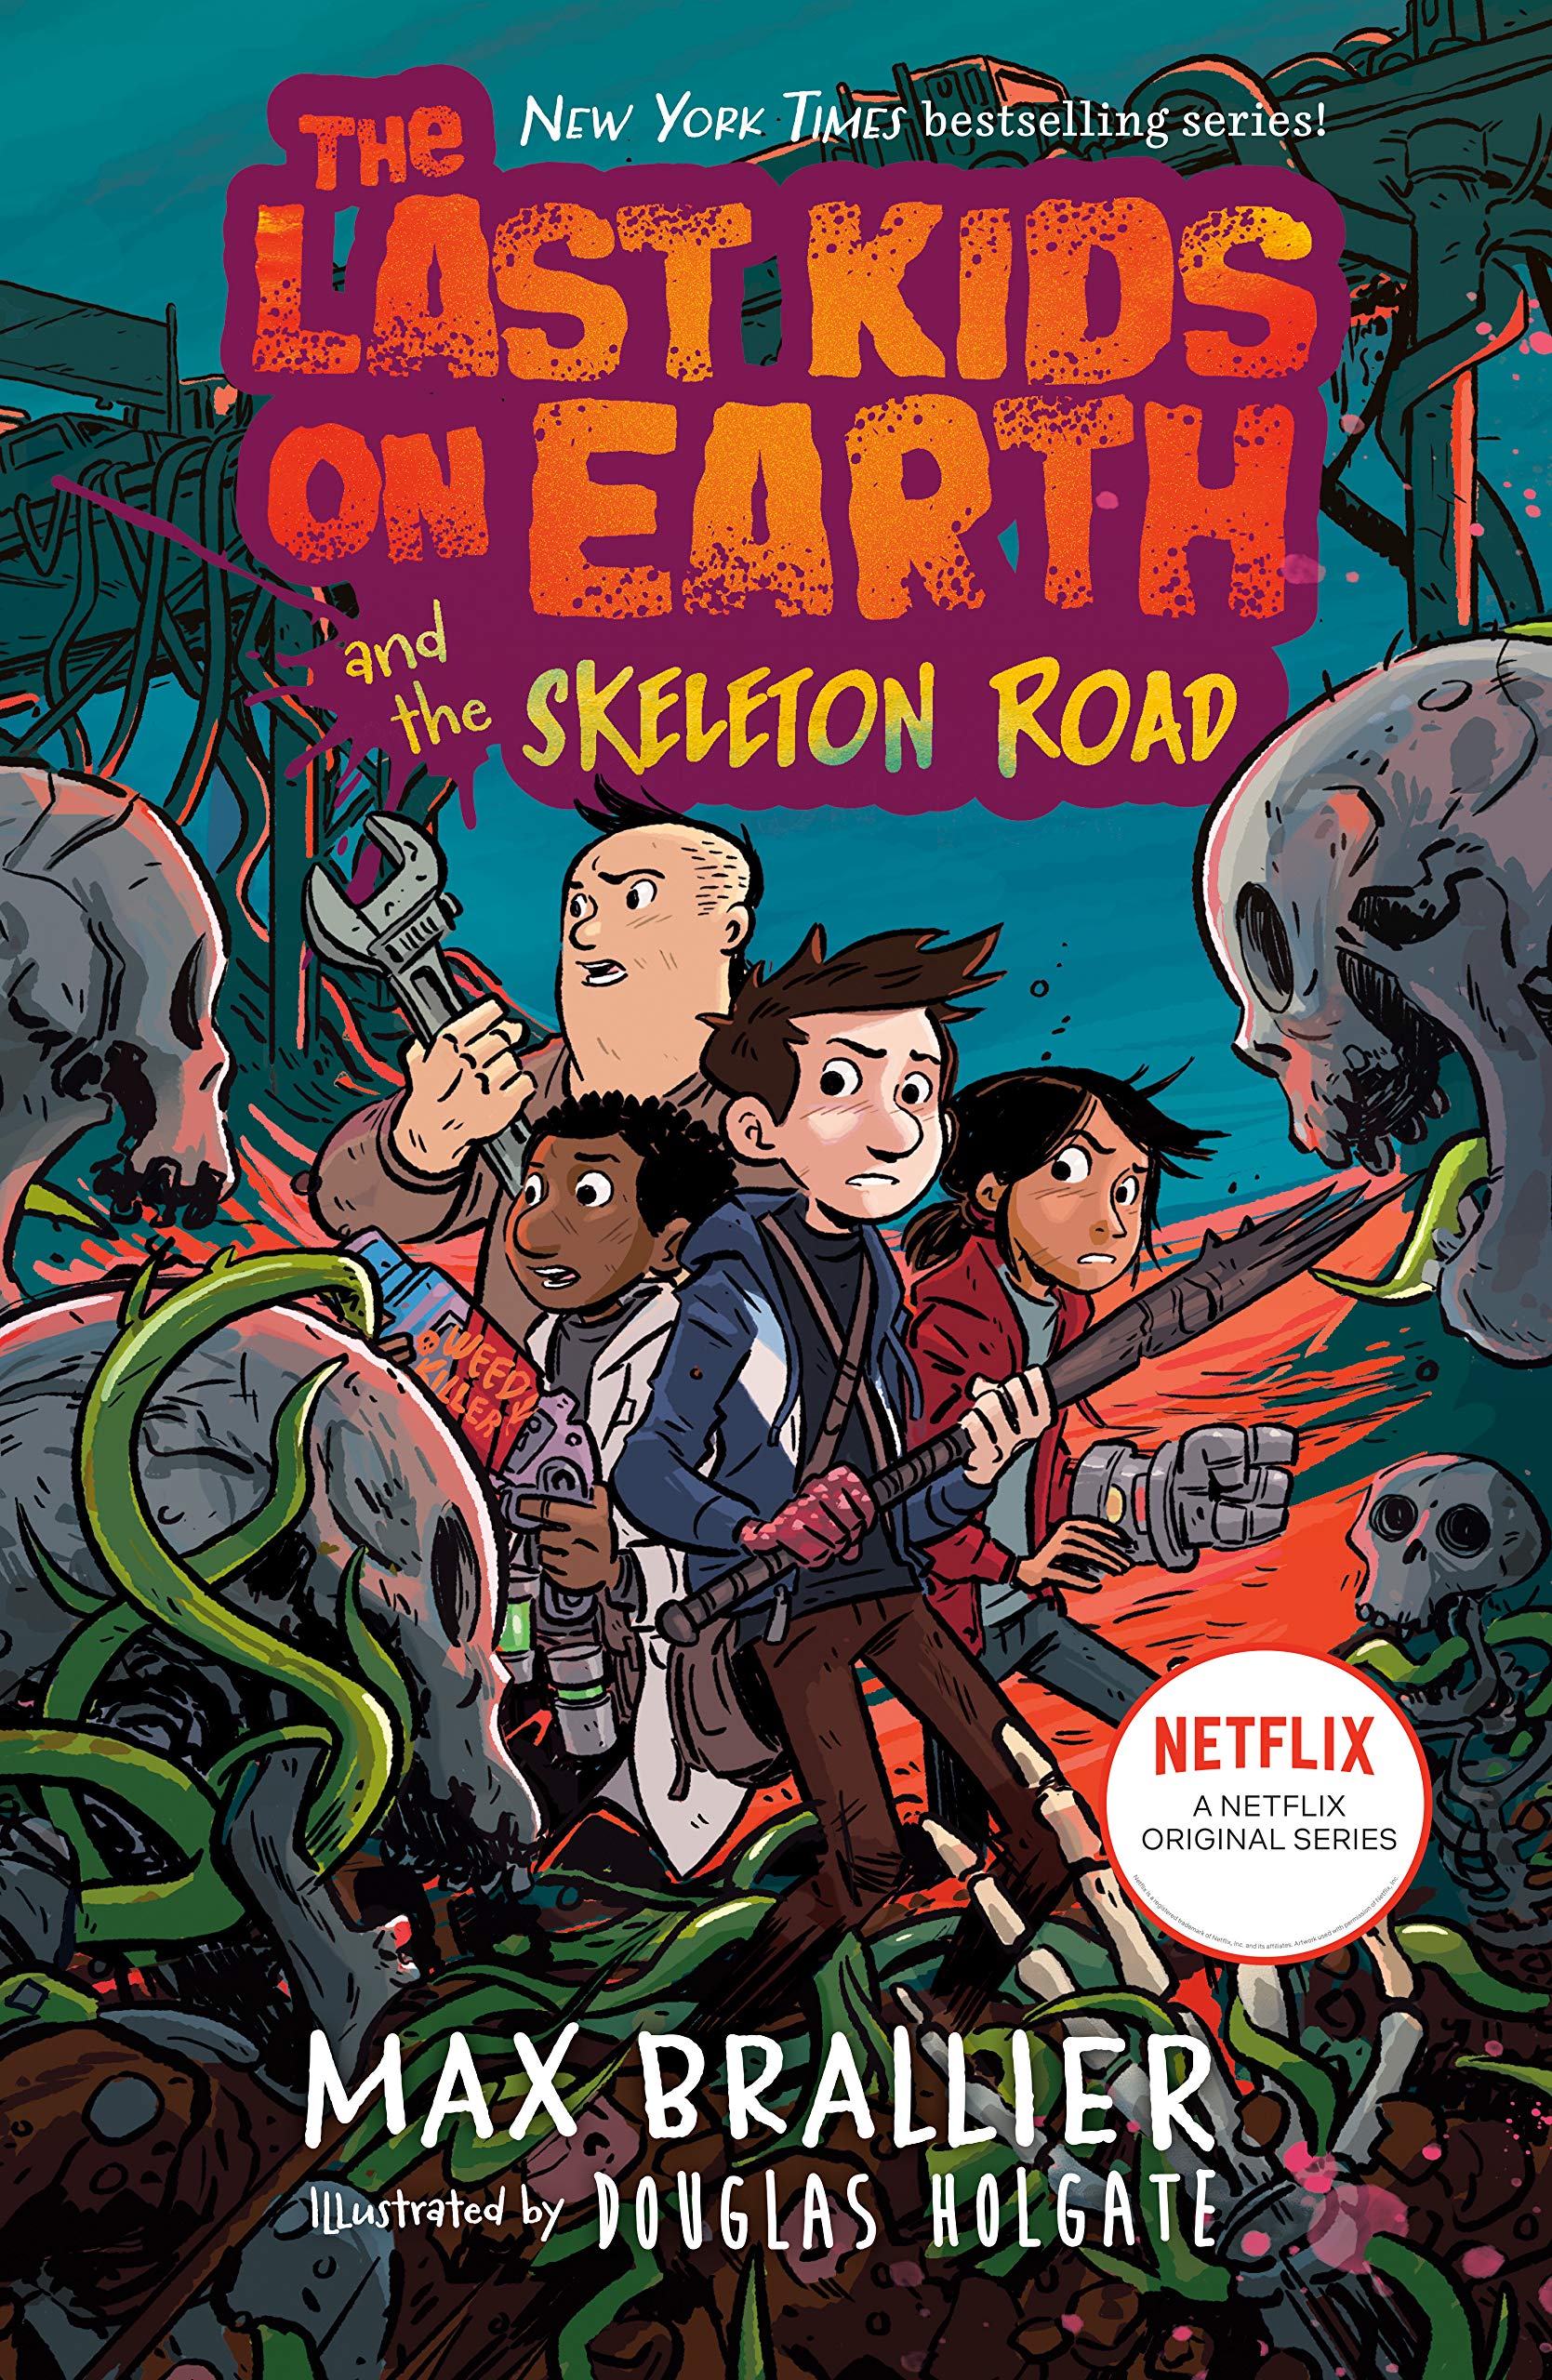 The Last Kids on Earth and the Skeleton Road (Last Kids on Earth #6) by Max Brallier